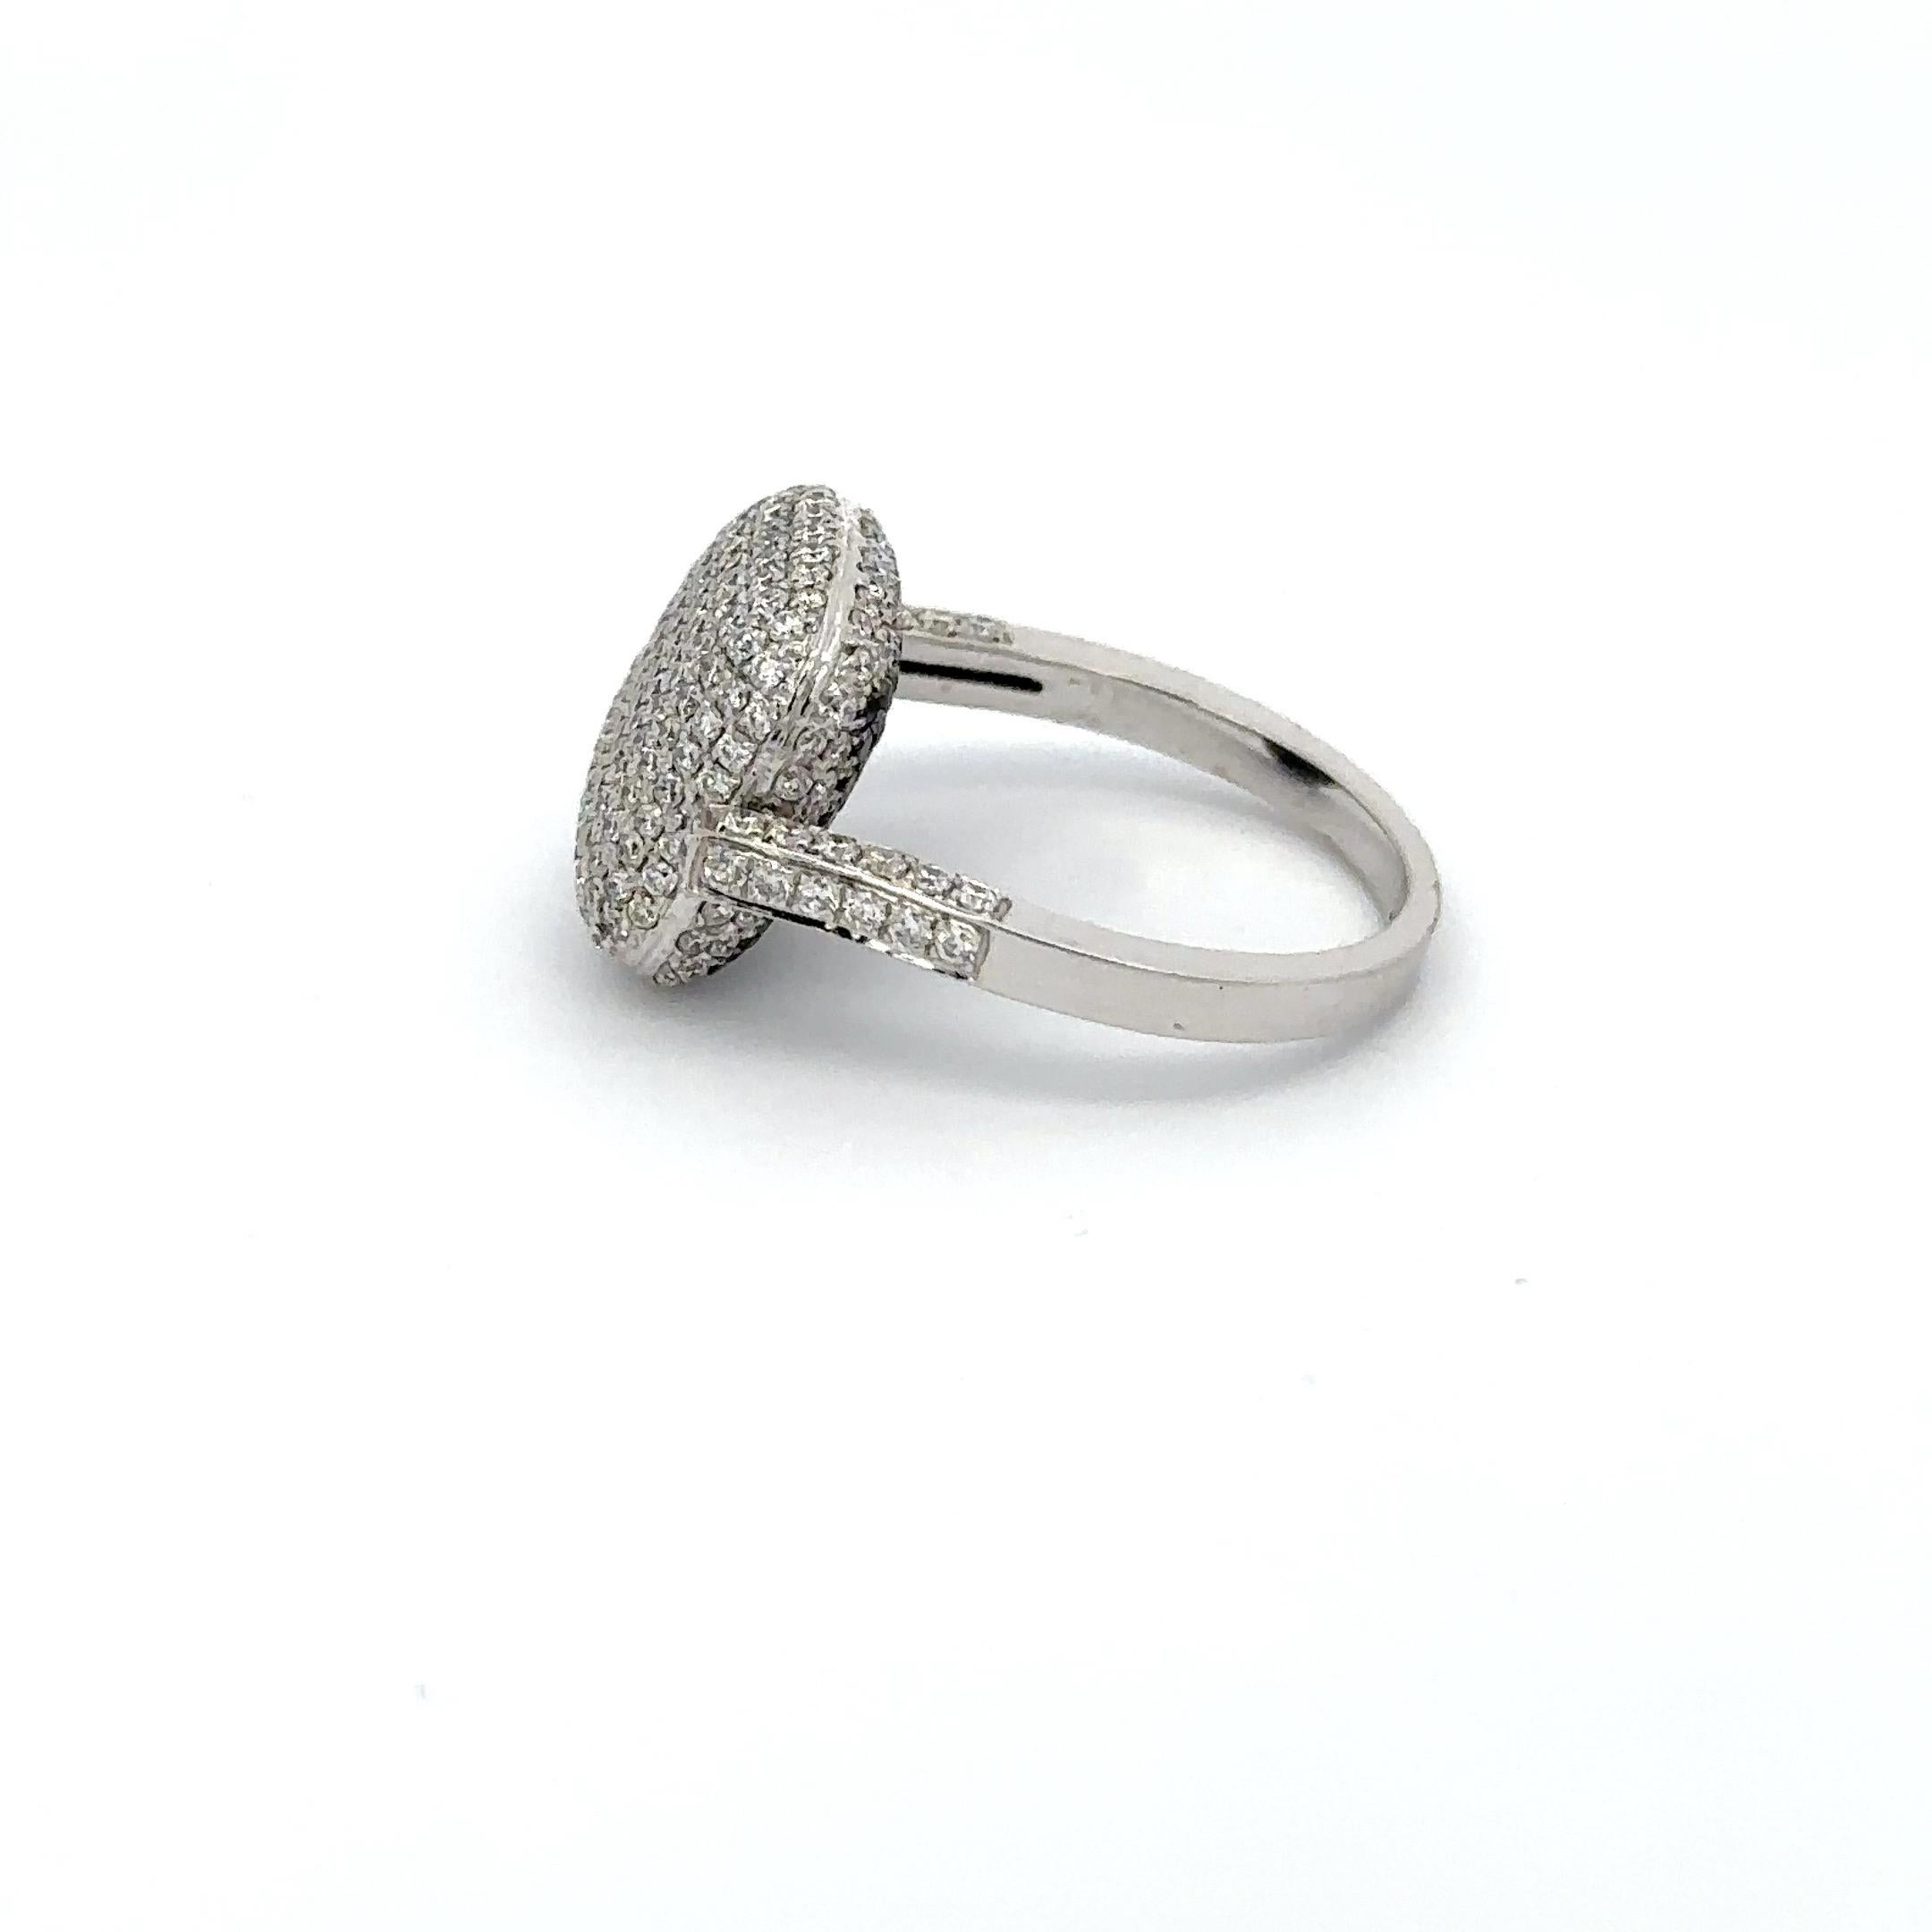 For Sale:  Unique Diamond Flip Ring in 18k Solid White Gold, Fine Jewelry for Him  9